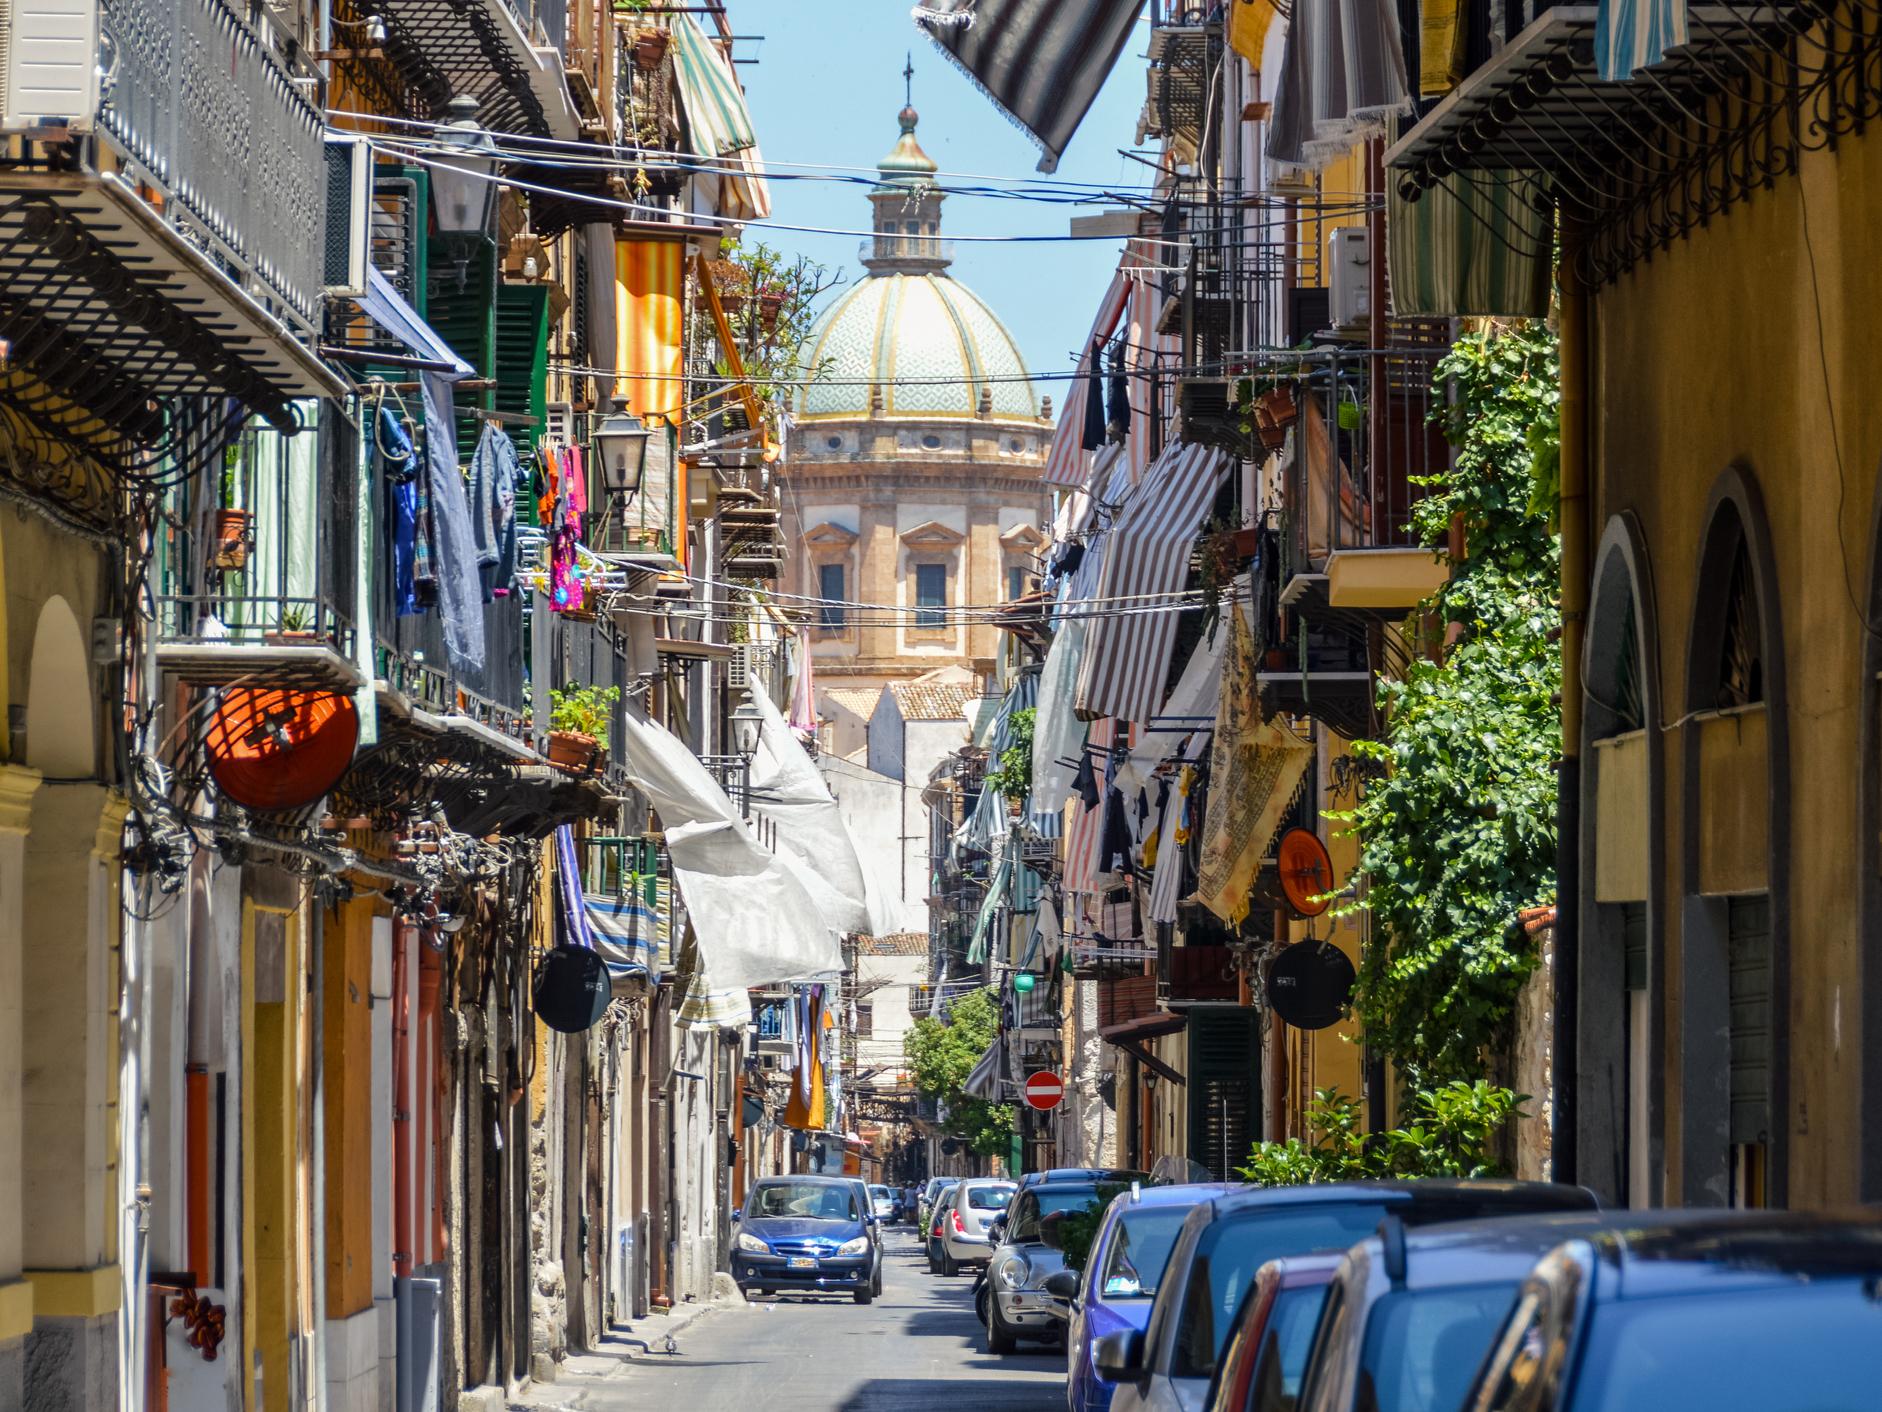 Palermo's streets have been free of the most dangerous forms of cannabis